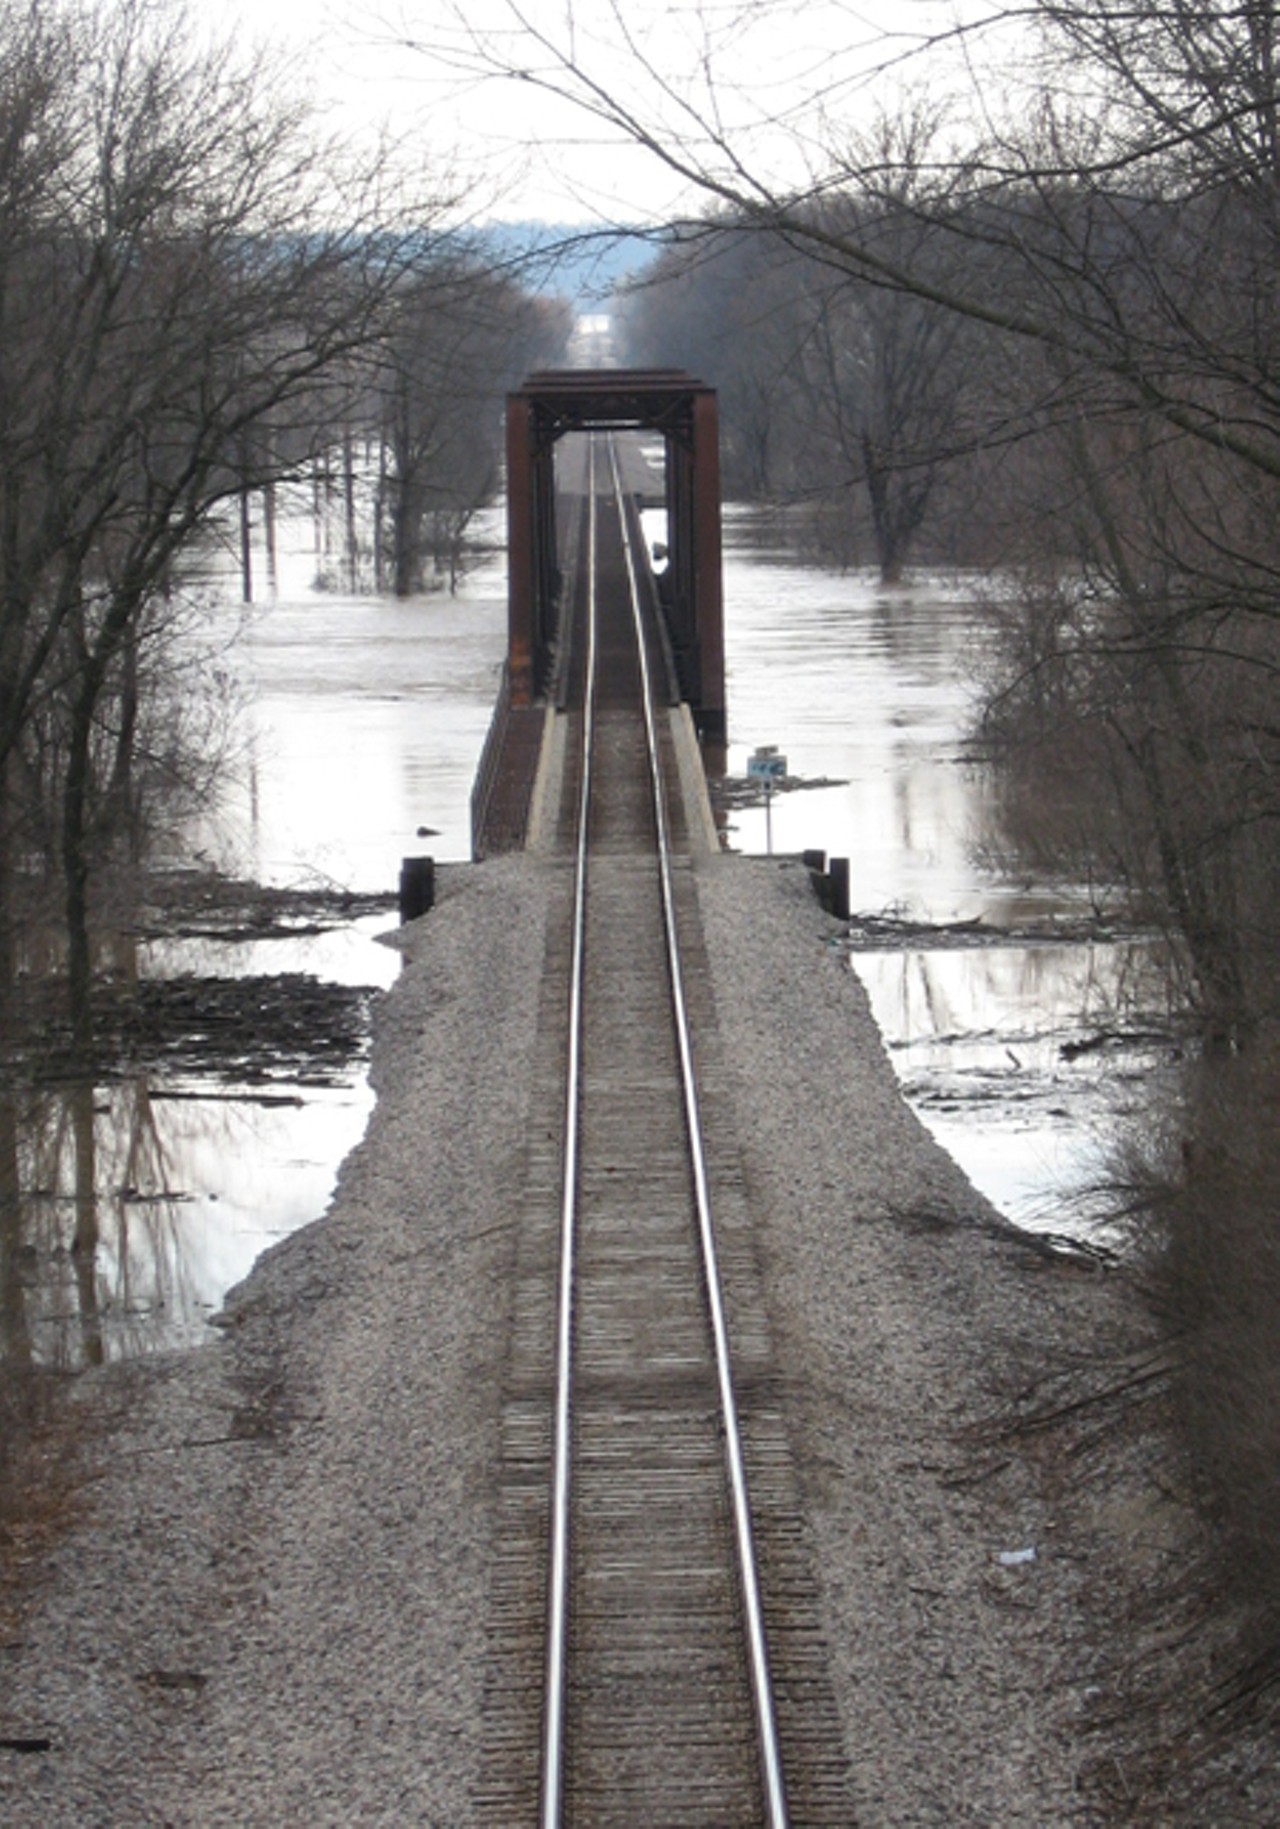 According to Randy, a resident of Baumgartner rd, up until Friday trains were still allowed to use the tracks that run underneath Baumgartner Road Bridge. They have since stopped due to the rising water.